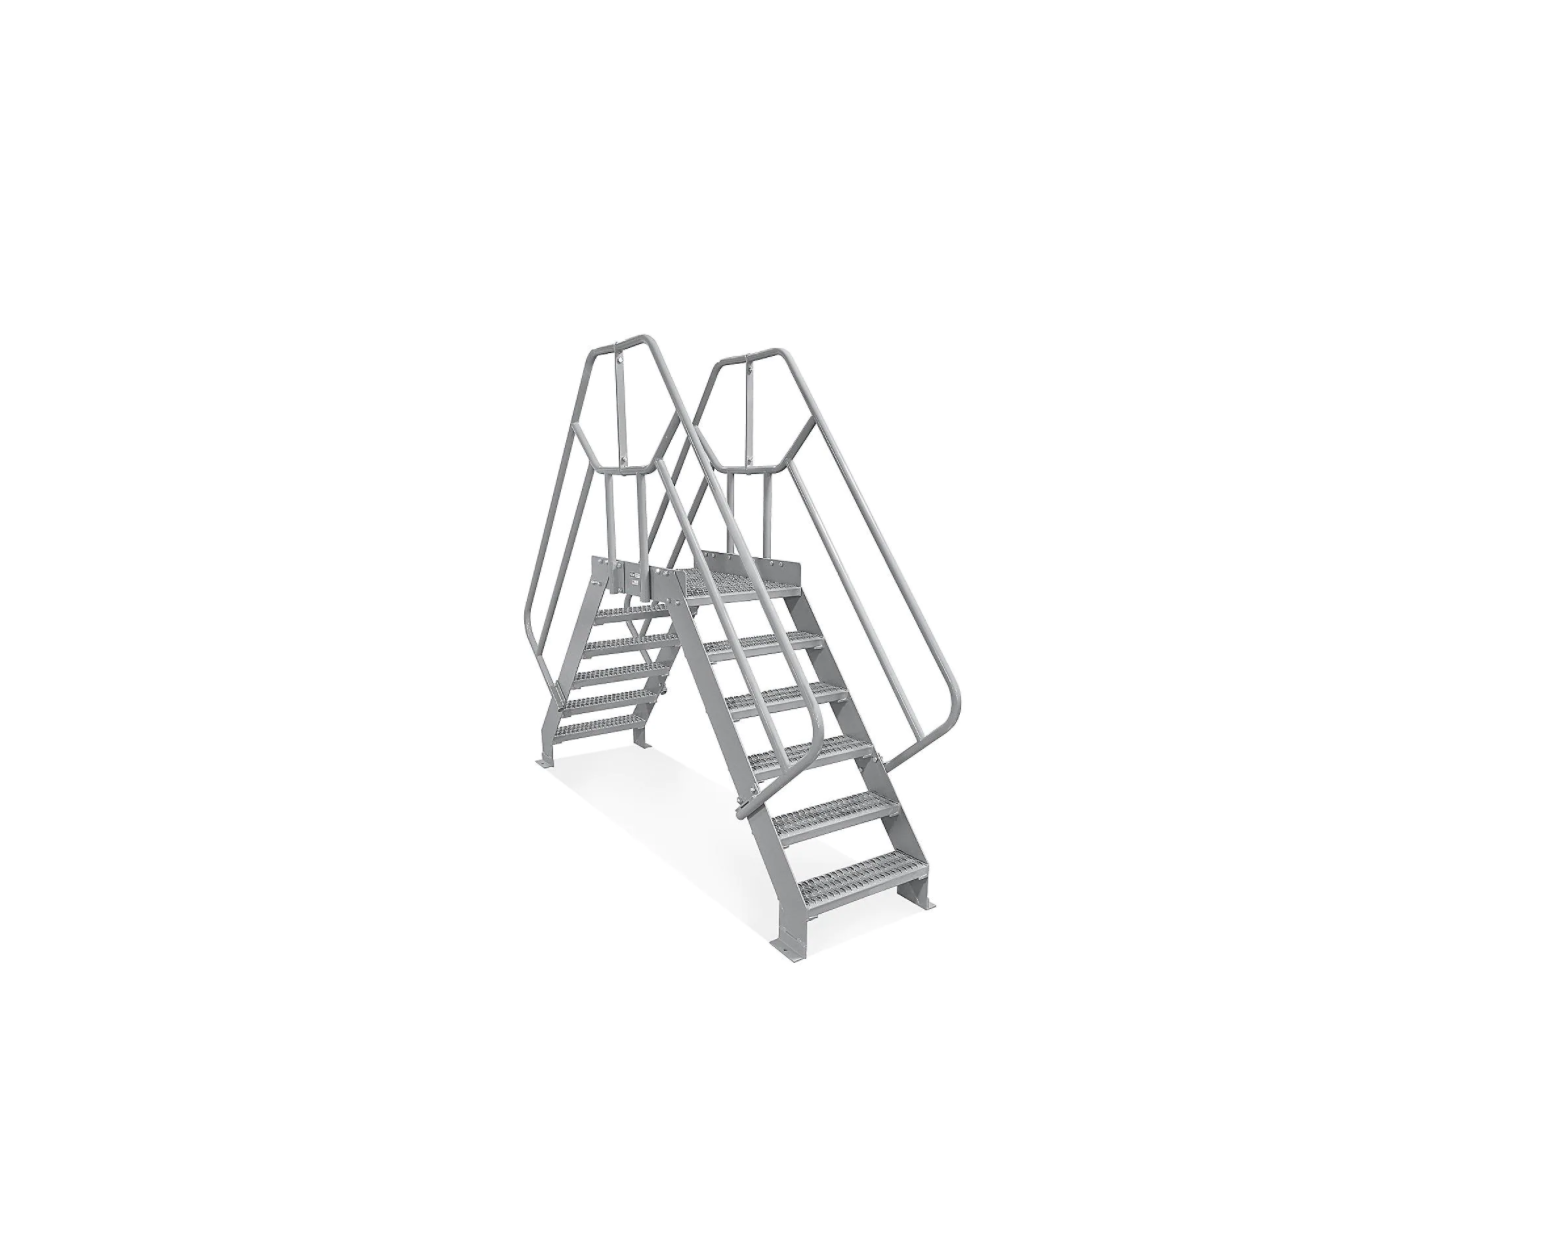 ULINE H-5592, H-5593, H-5594 Crossover Ladders Installation Guide